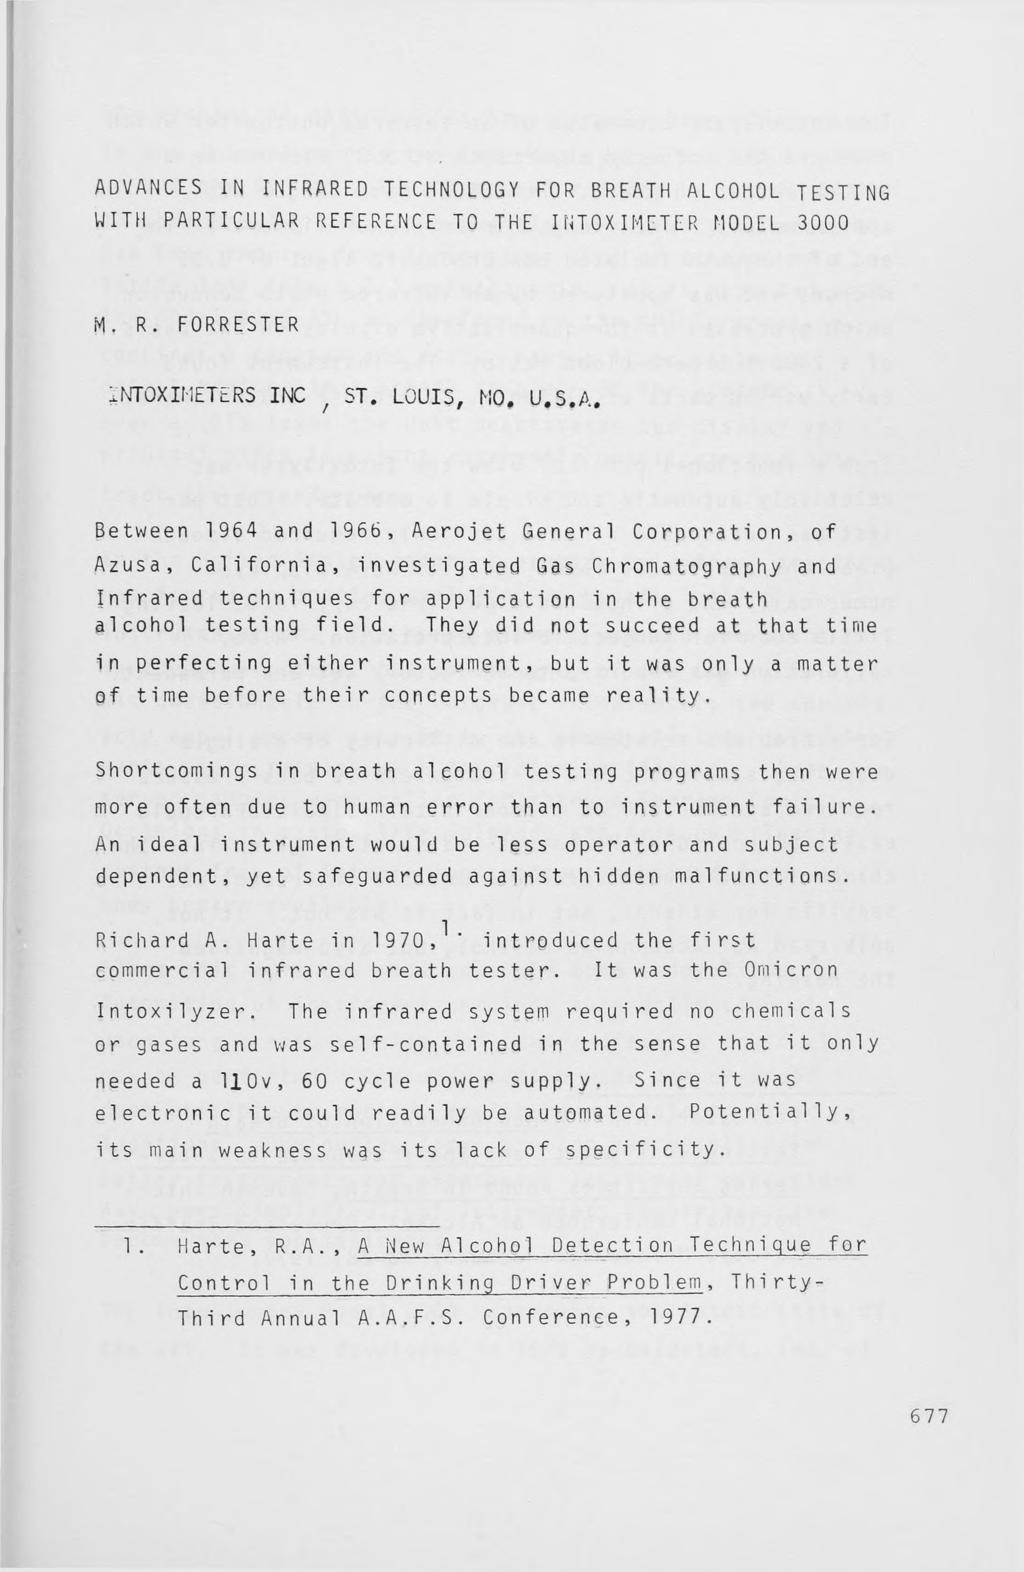 ADVANCES IN INFRARED TECHNOLOGY FOR BREATH ALCOHOL TESTING WITH PARTICULAR REFERENCE TO THE INTOXIMETER MODEL 3000 M, R. FORRESTER INTOXIMETERS INC "f ST. LOUIS, MQ, U.S.A. Between 1964 and 1966, Aerojet General Corporation, of Azusa, California, investigated Gas Chromatography and Infrared techniques for application in the breath alcohol testing field.